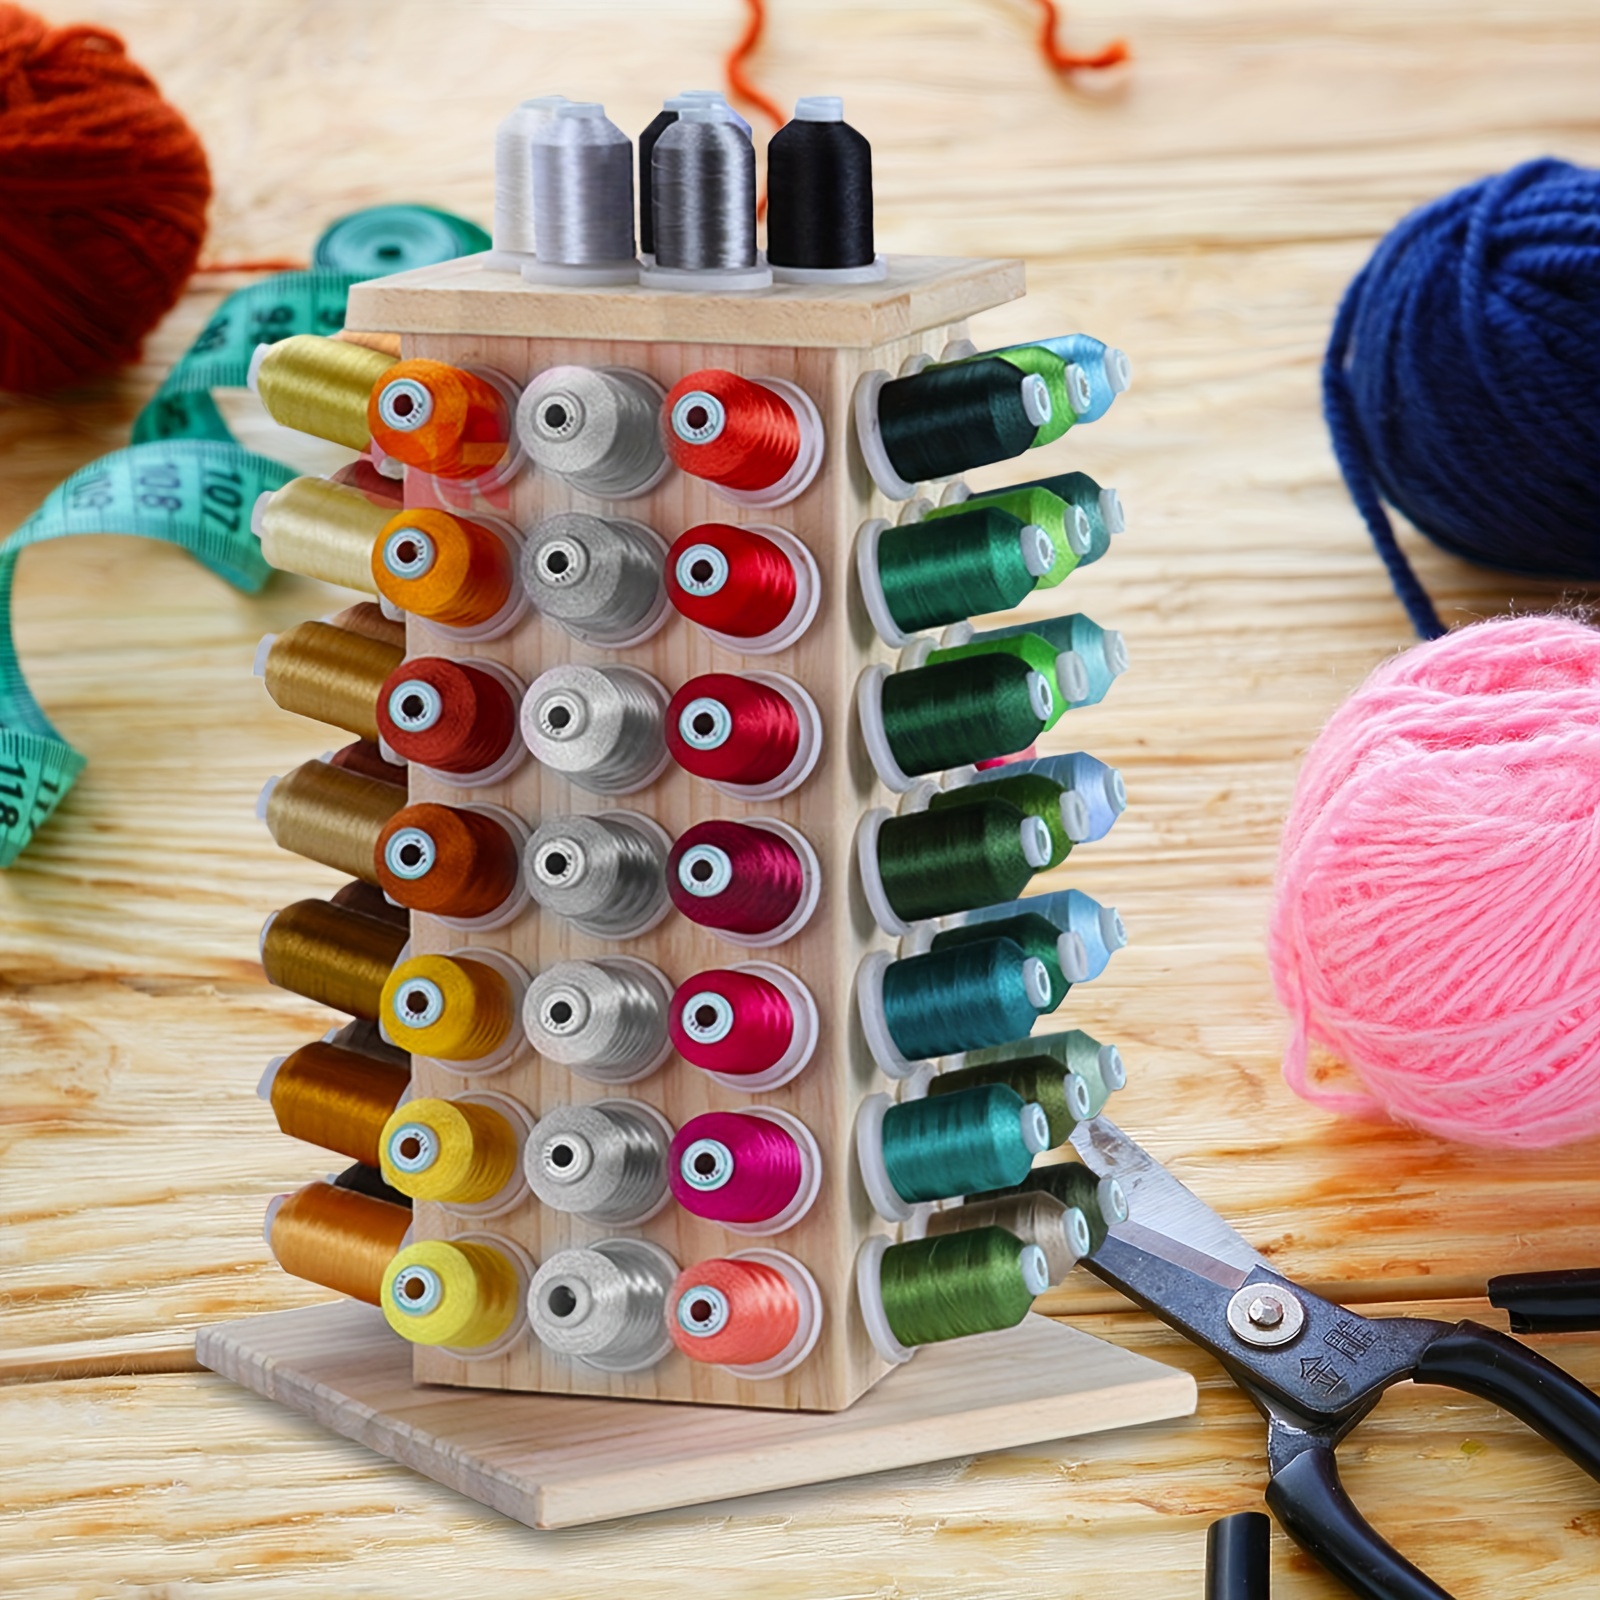 84 Spools (diy To Be 93 Spools) 360 Fully Rotating Wooden Thread Rack/thread  Holder Organizer For Sewing, Quilting, Embroidery, Hair-braiding And Jewe